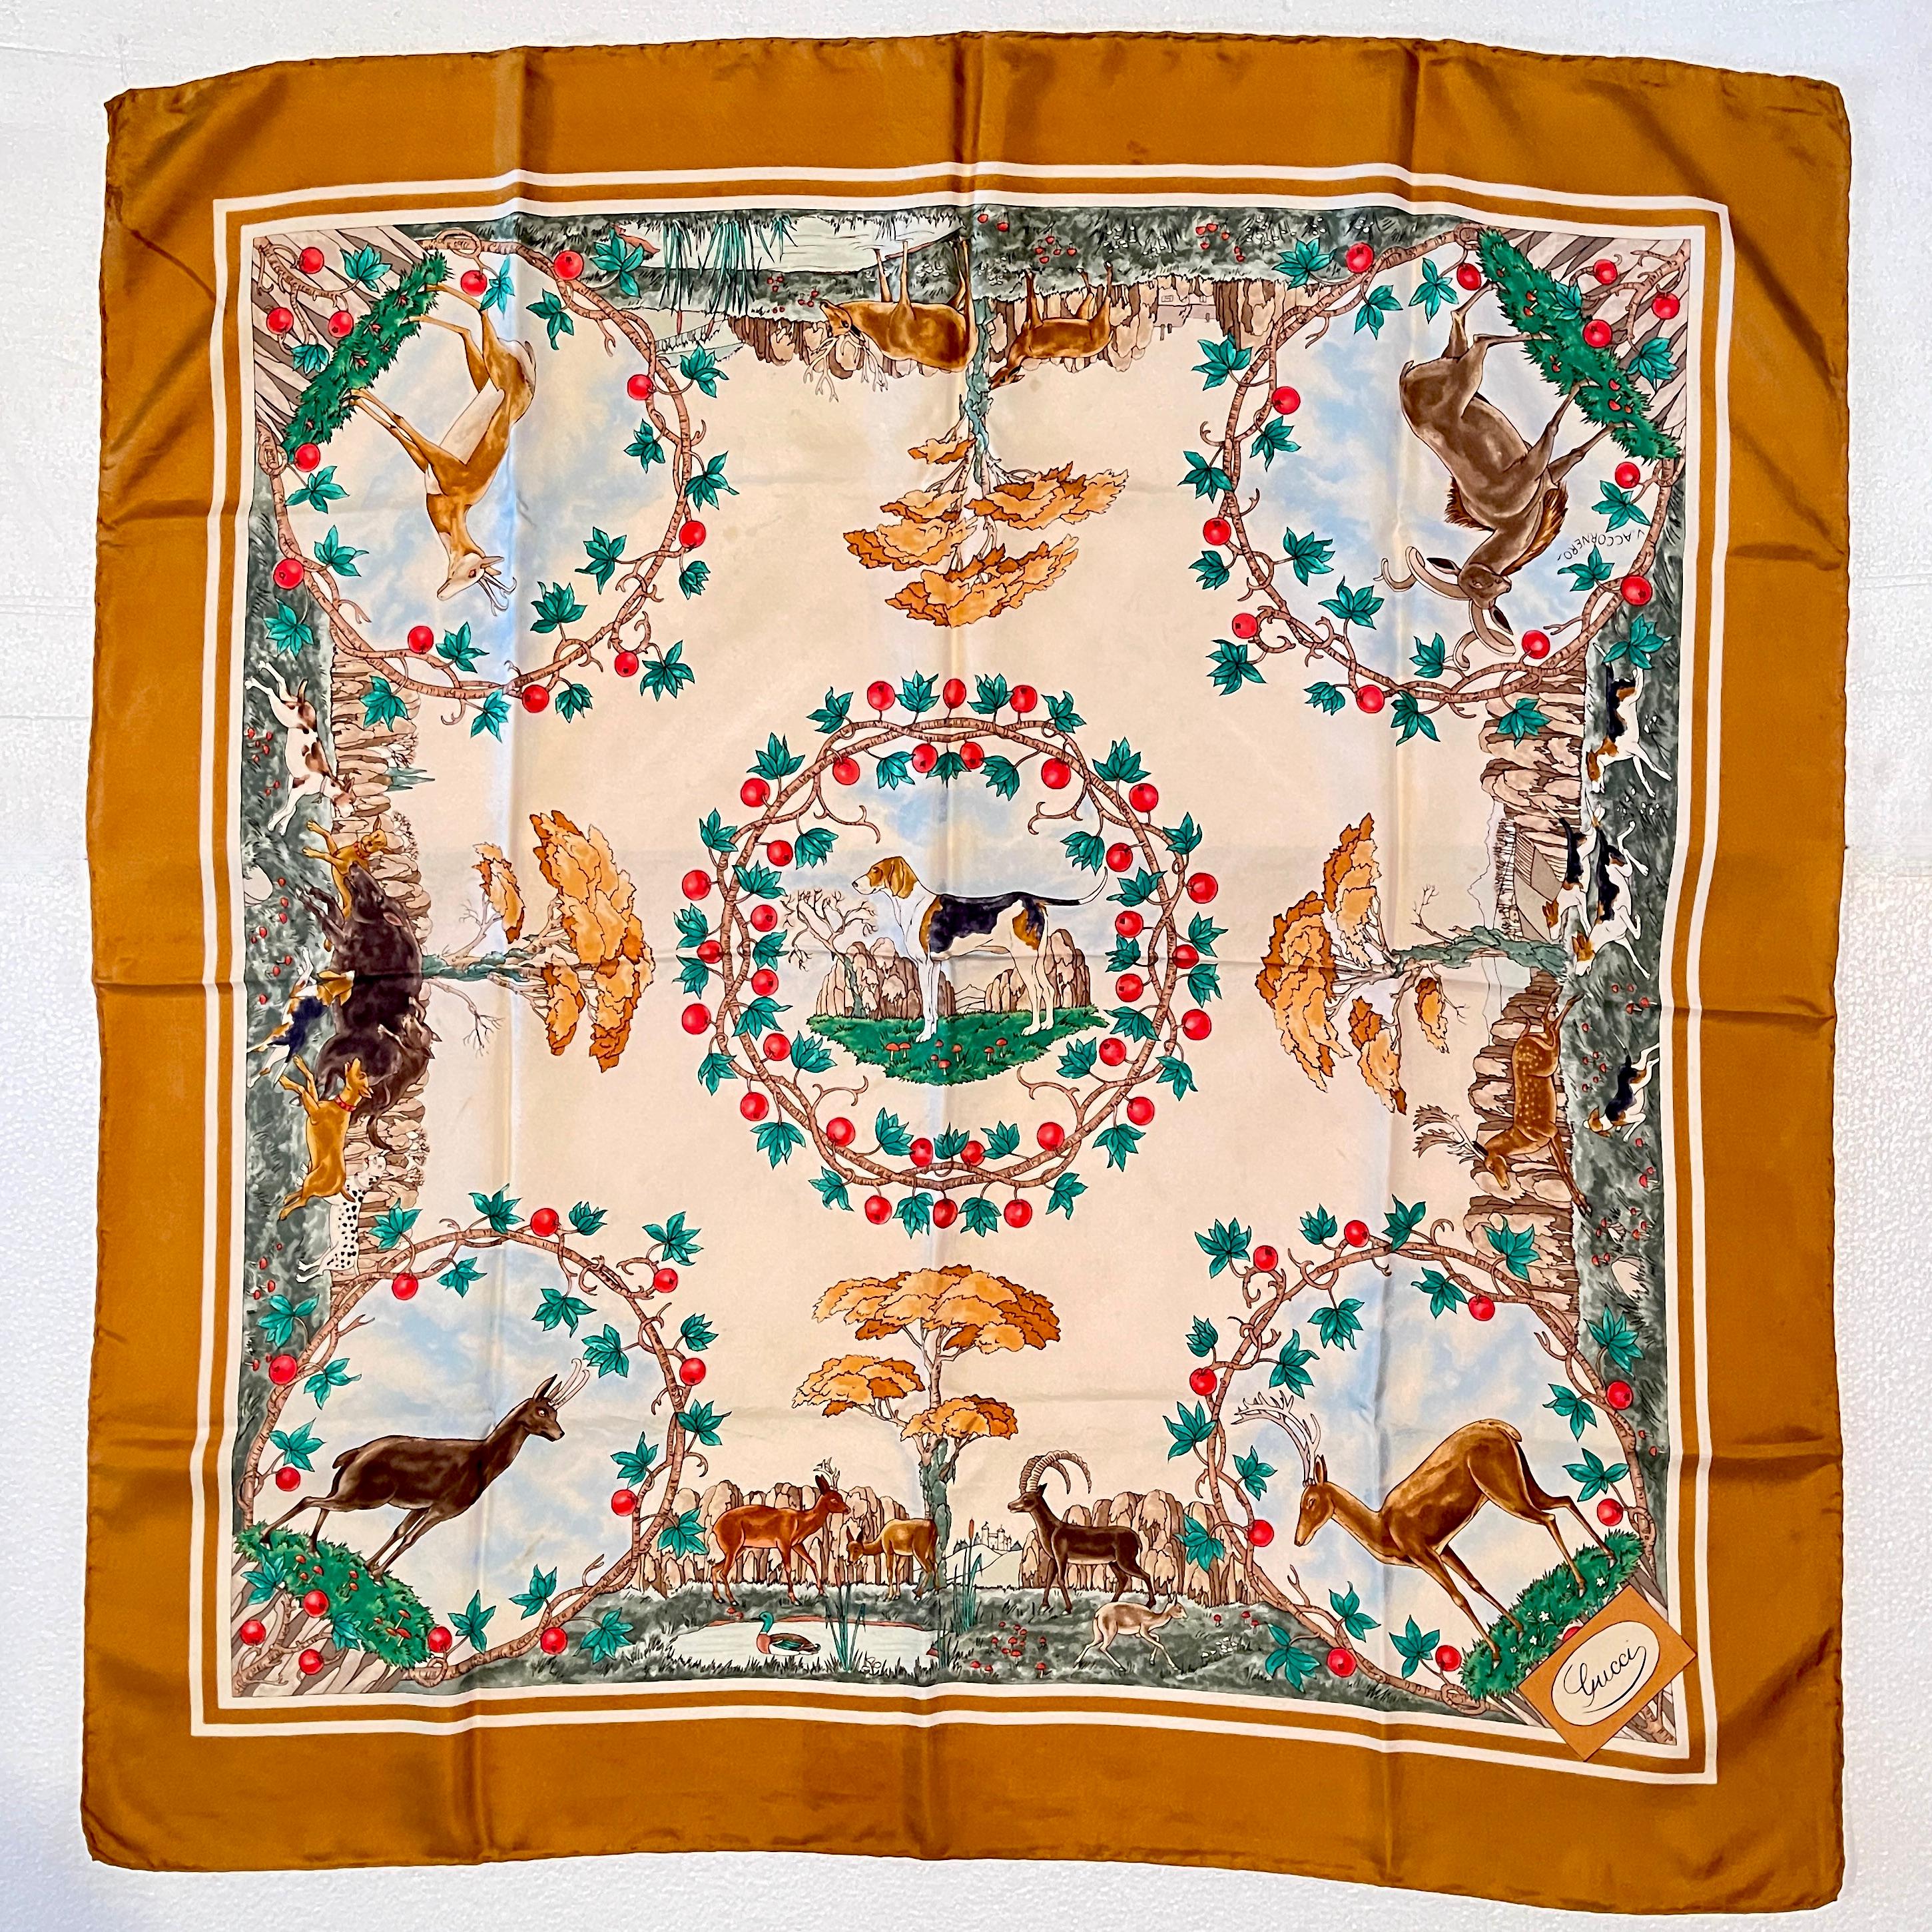 From the Italian fashion house Gucci, and designed by Vittorio Accornero, a vintage silk scarf with a hunting dog theme, circa 1970s.

Boldly colored and beautifully detailed, a central motif of a beagle or pointer dog standing in a landscape